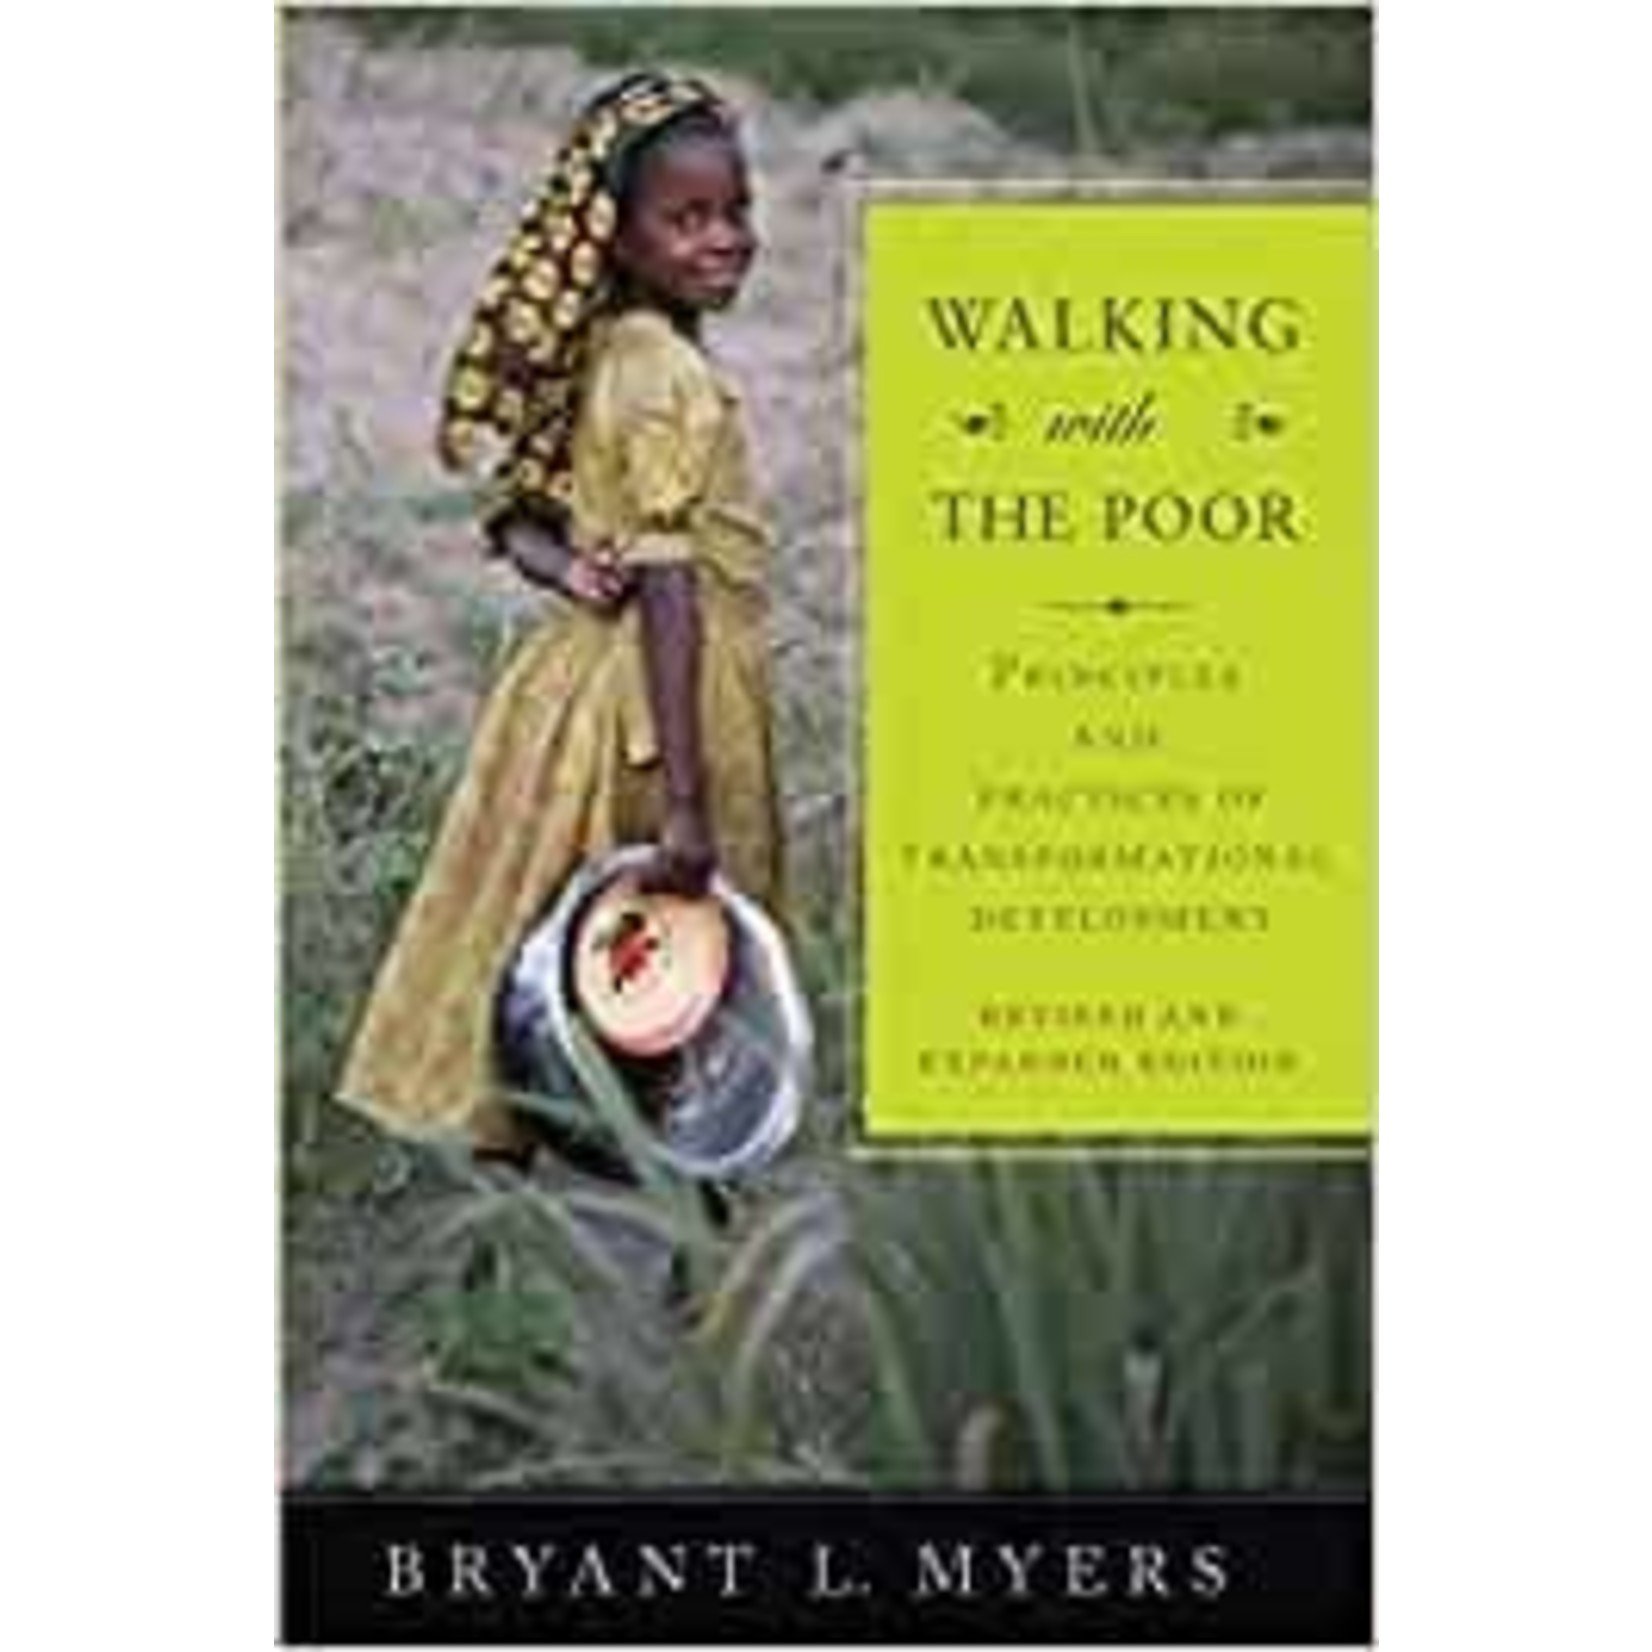 Walking with the Poor: Principles & Practices of Transformational Development